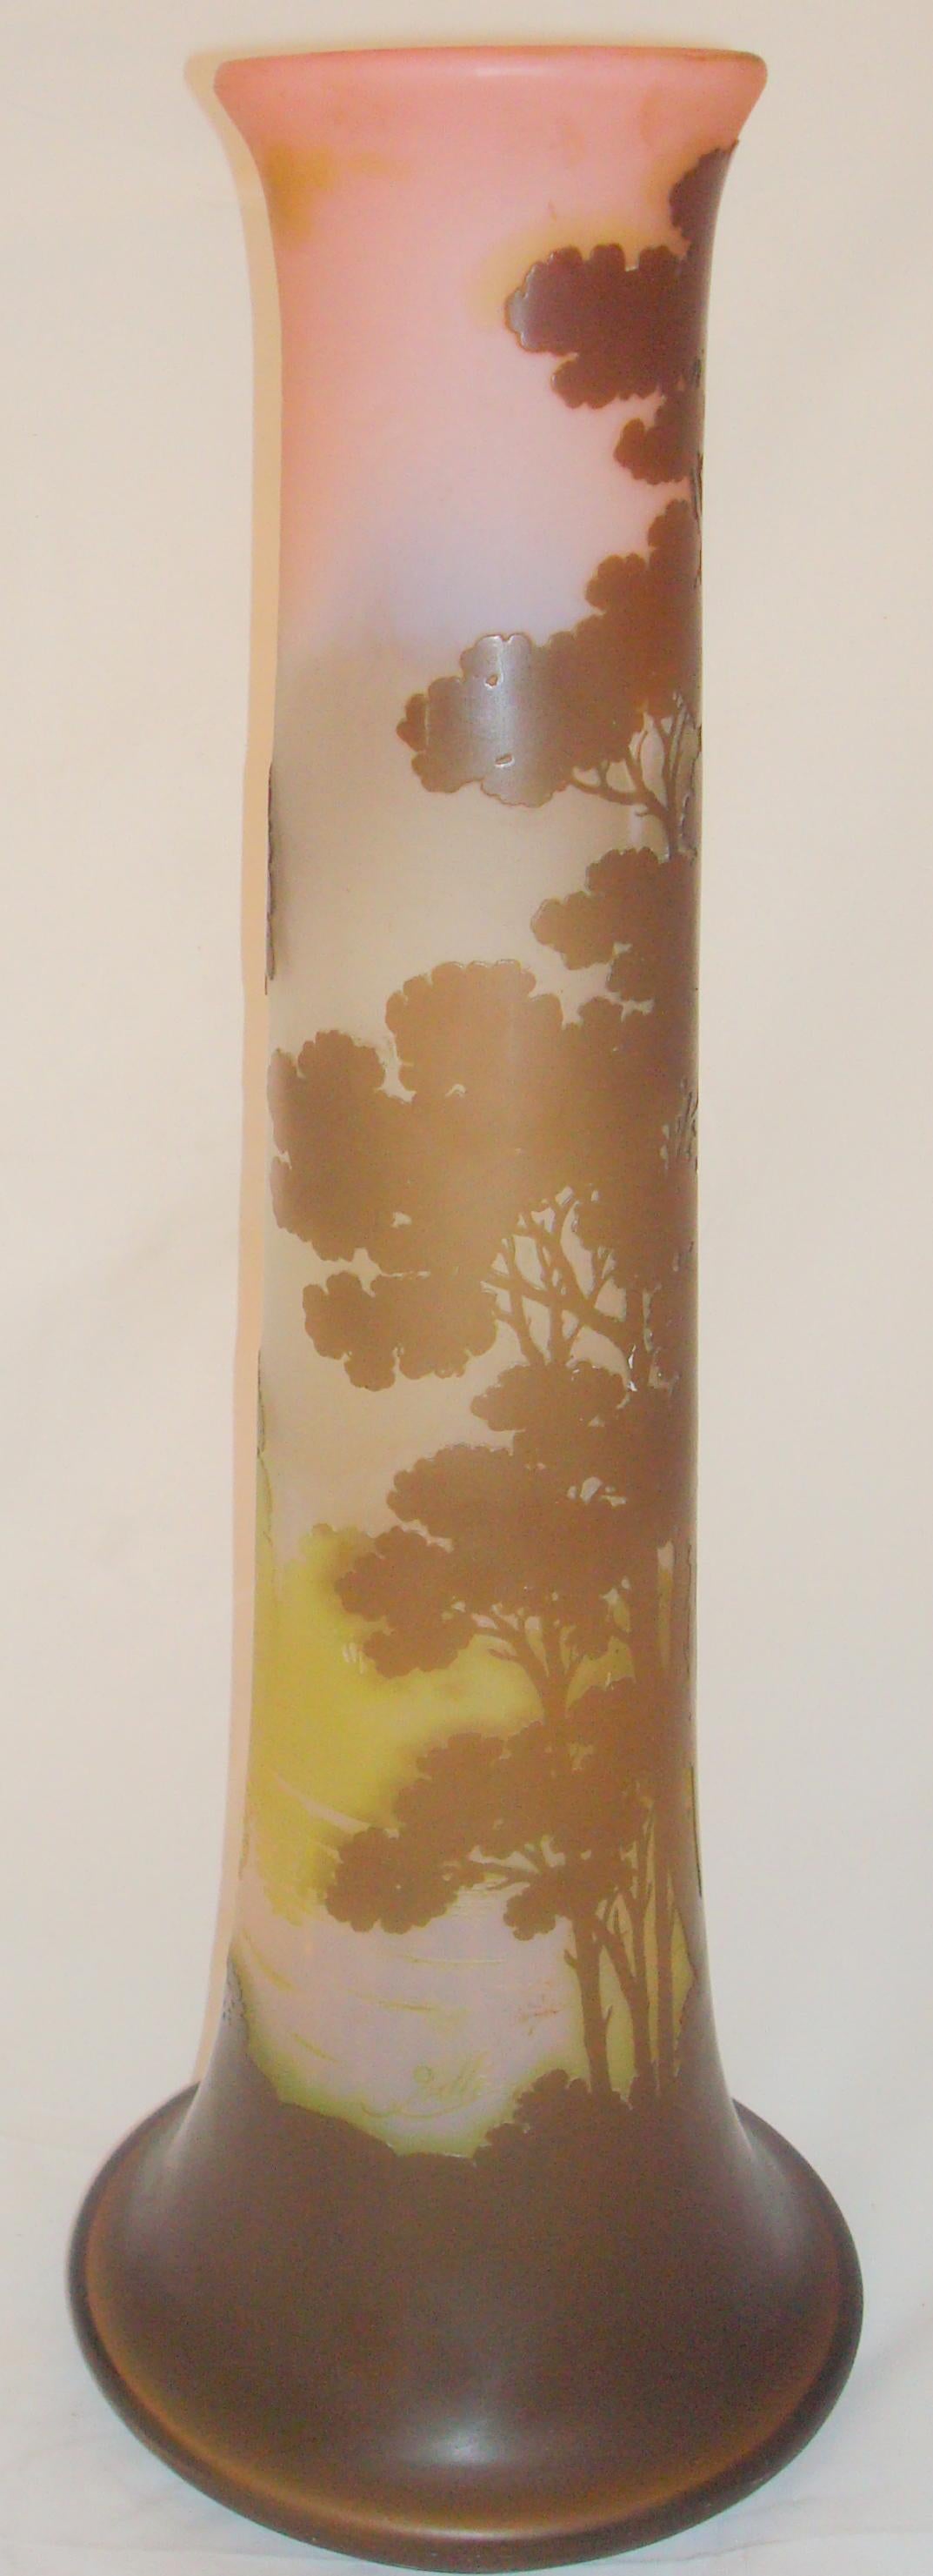 Monumental French Vase, Sign: Gallé, Style: Jugendstil, Art Nouveau, Liberty In Good Condition For Sale In Ciudad Autónoma Buenos Aires, C